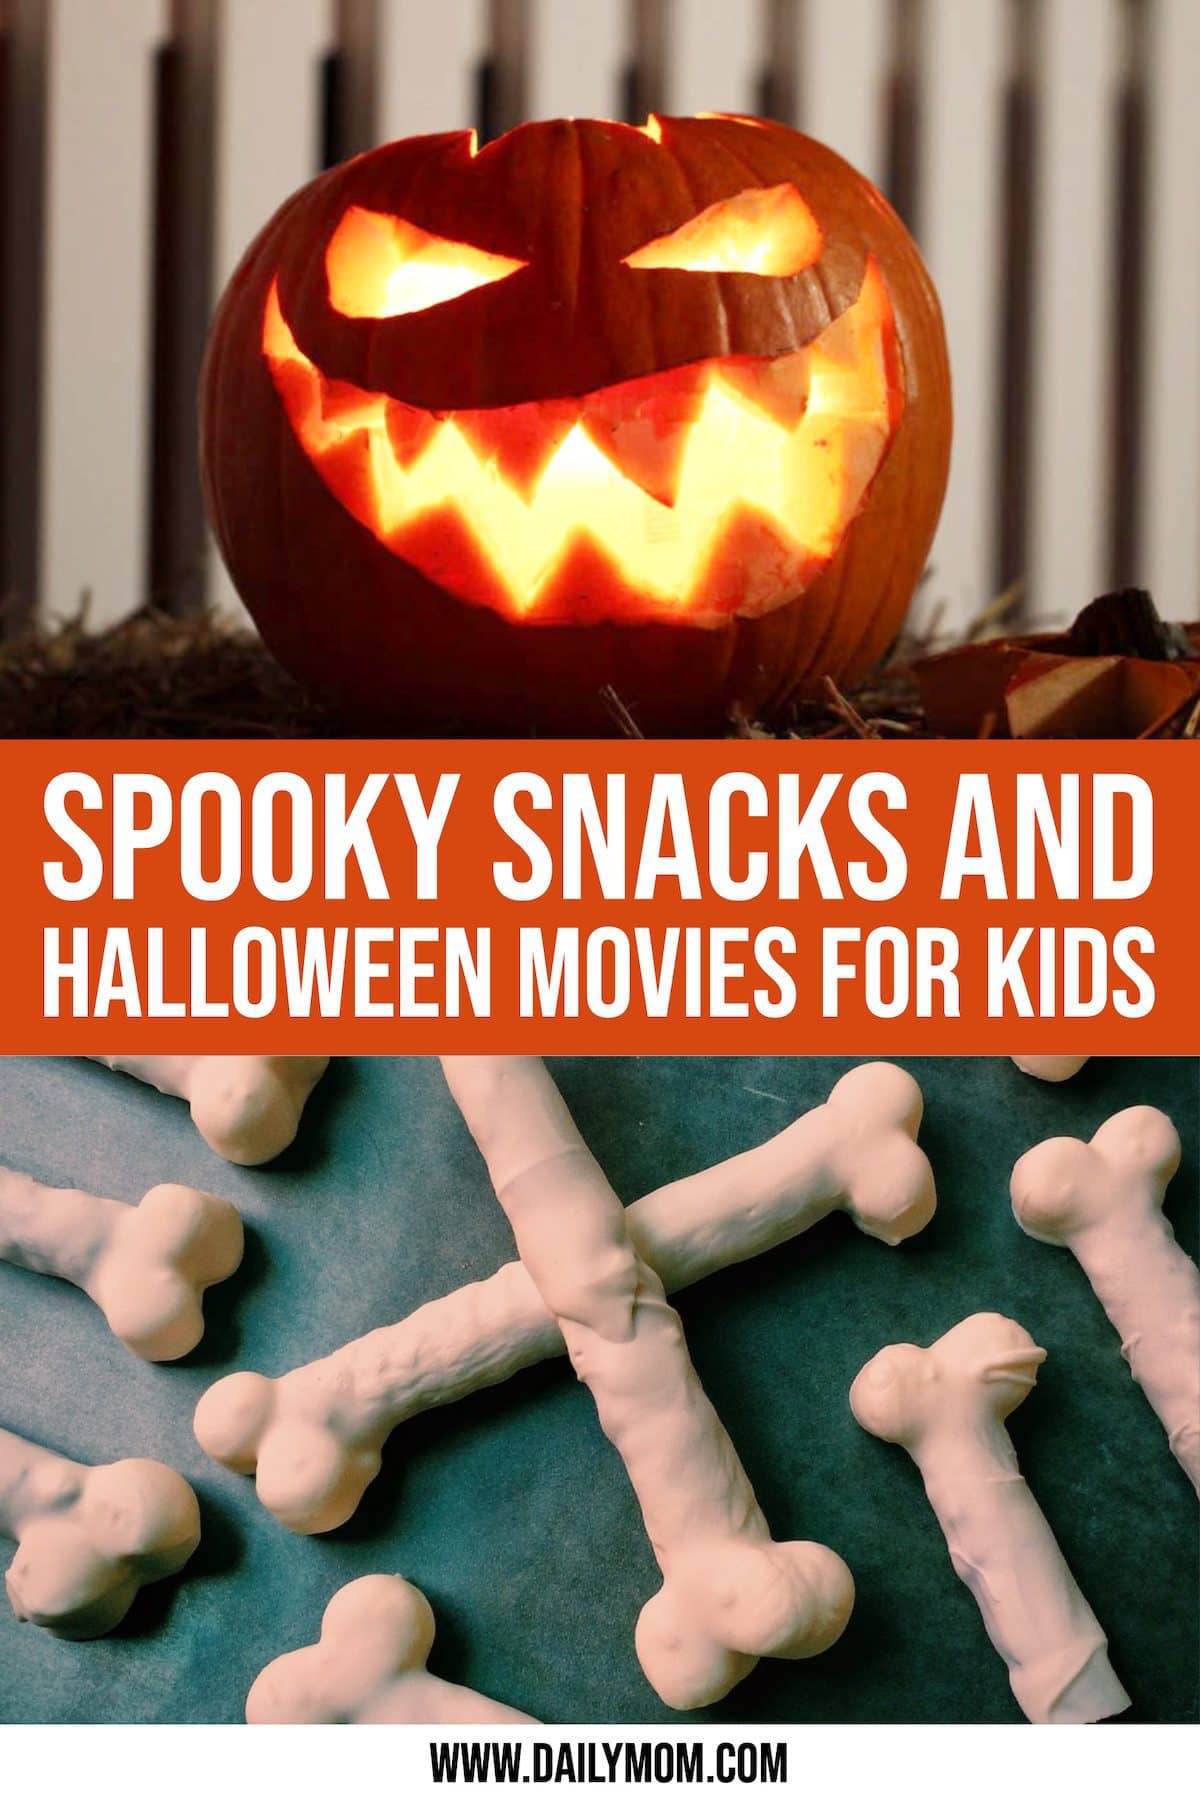 Spooky Snacks And Halloween Movies For Kids